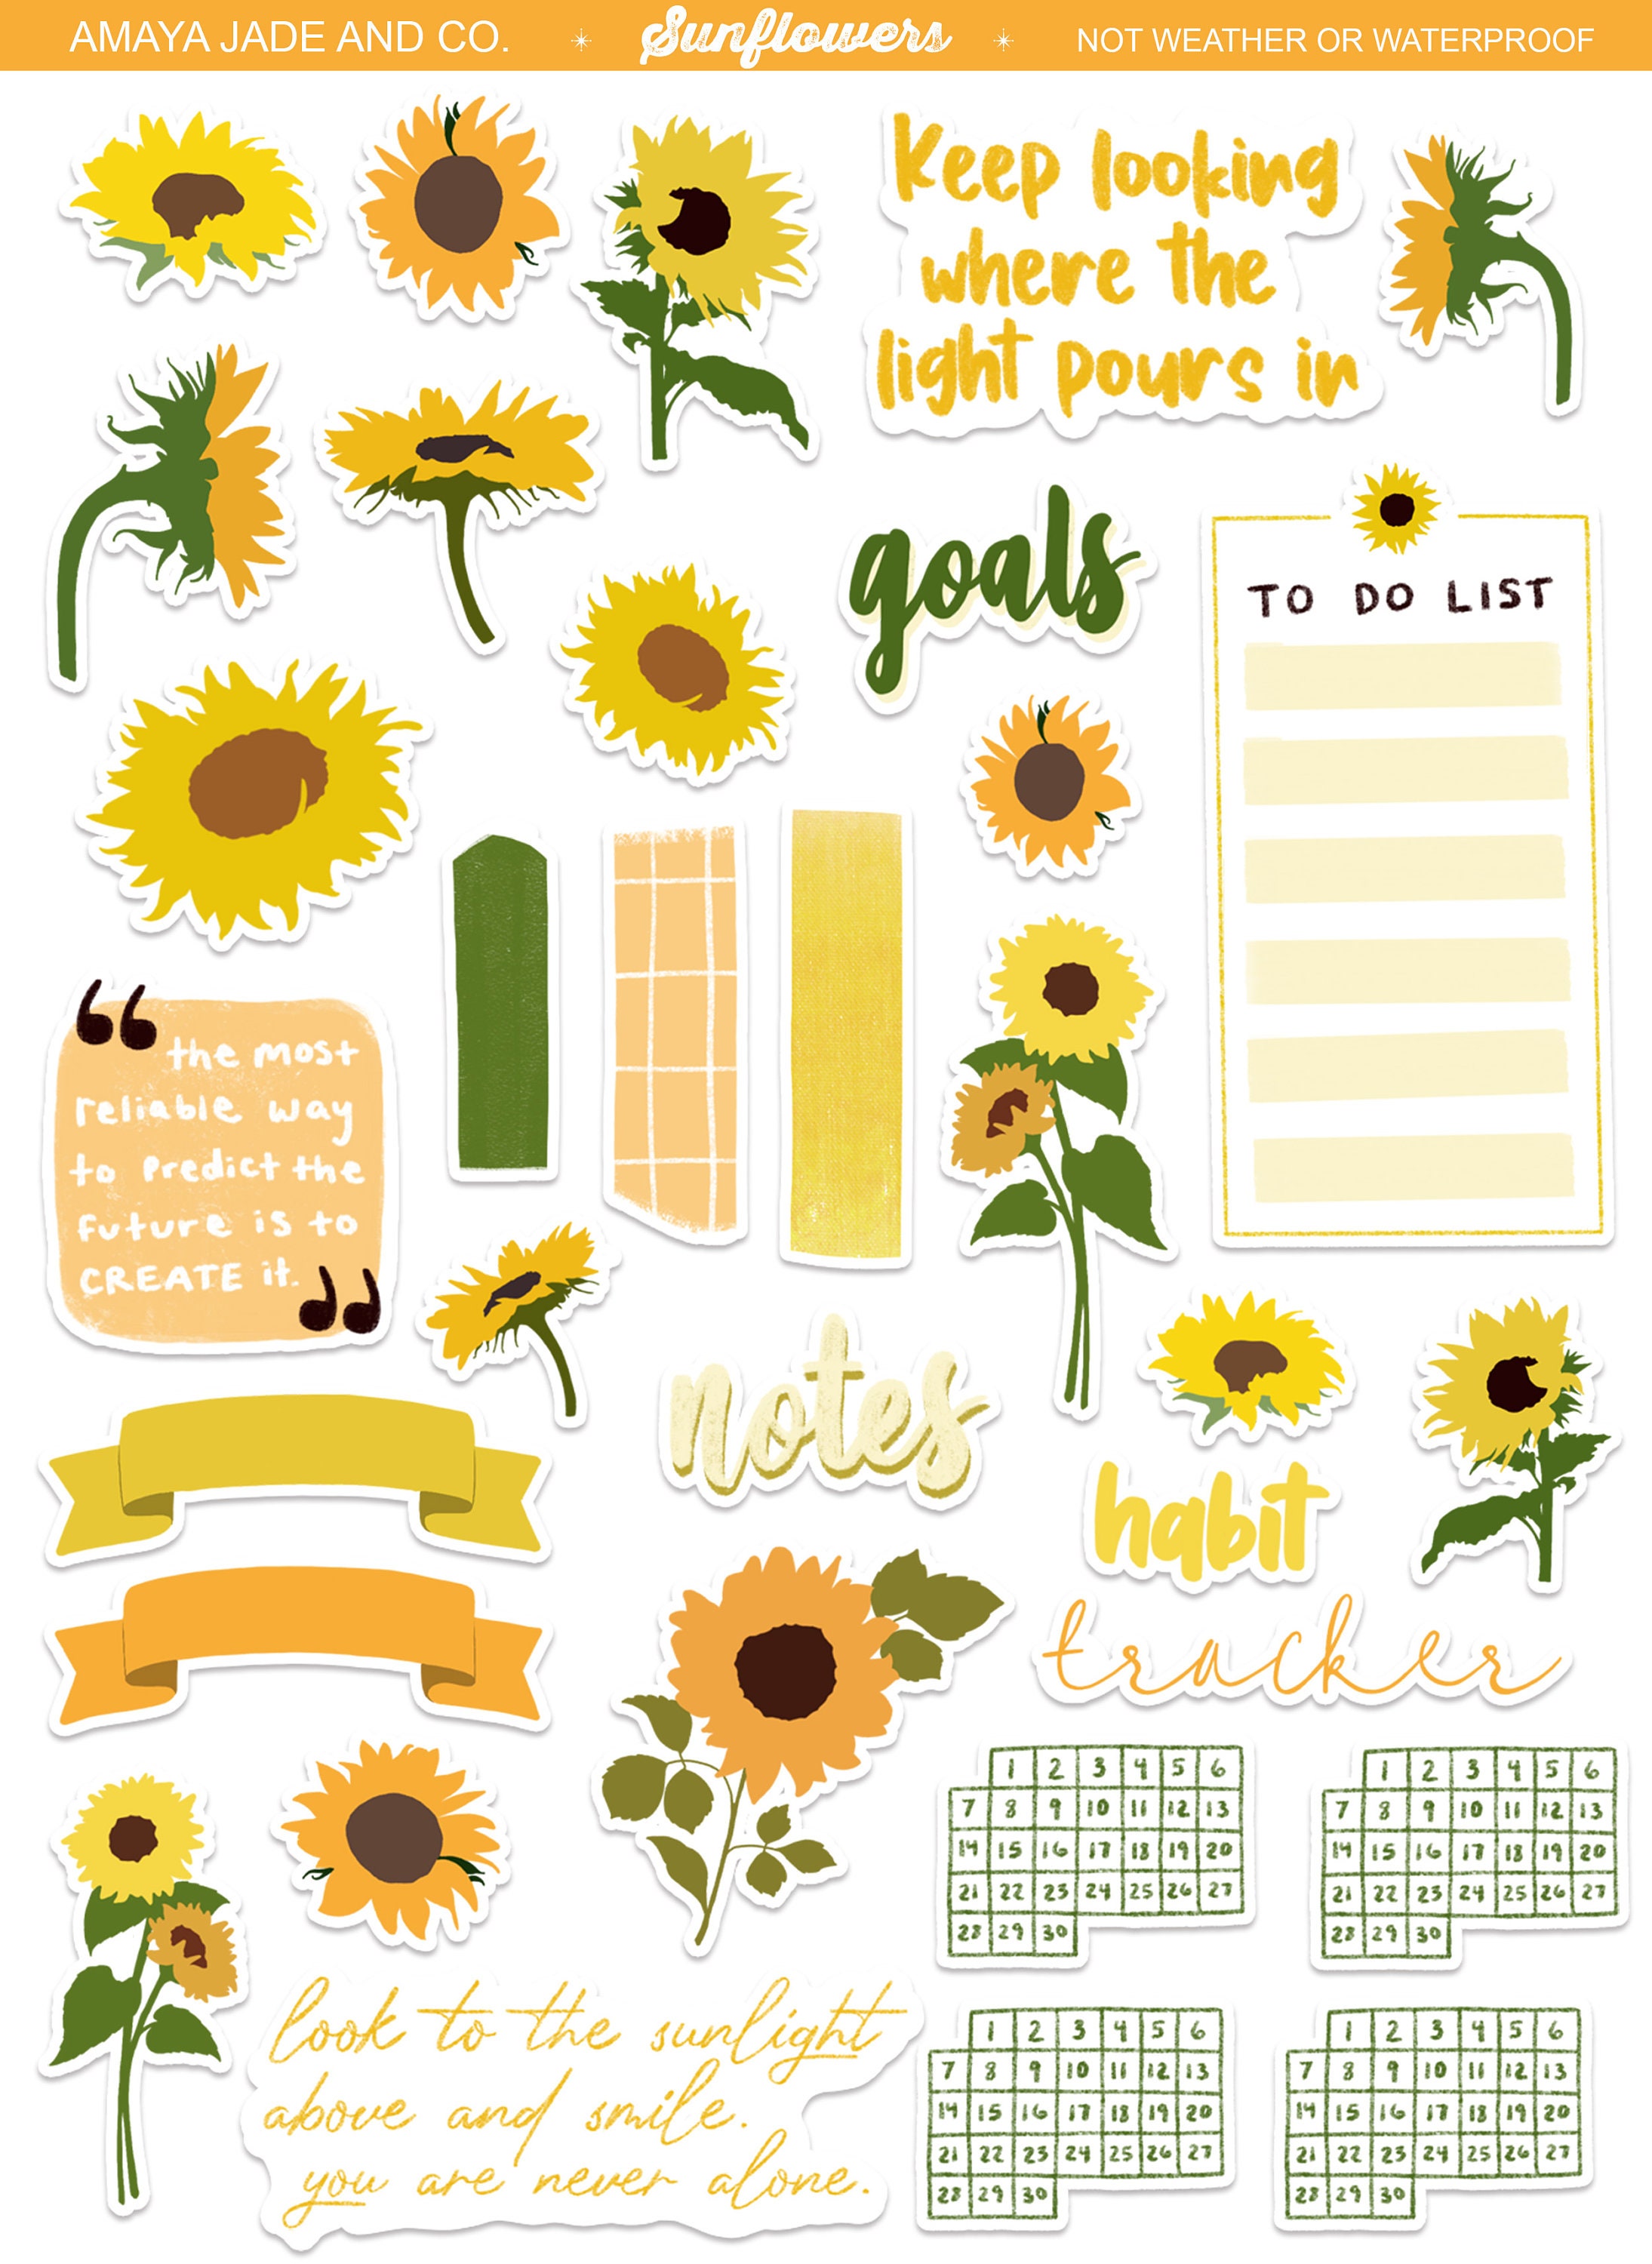 Free Printable Desert Dreamer Style Journal & Planner Stickers With Canon  IVY - Something Turquoise